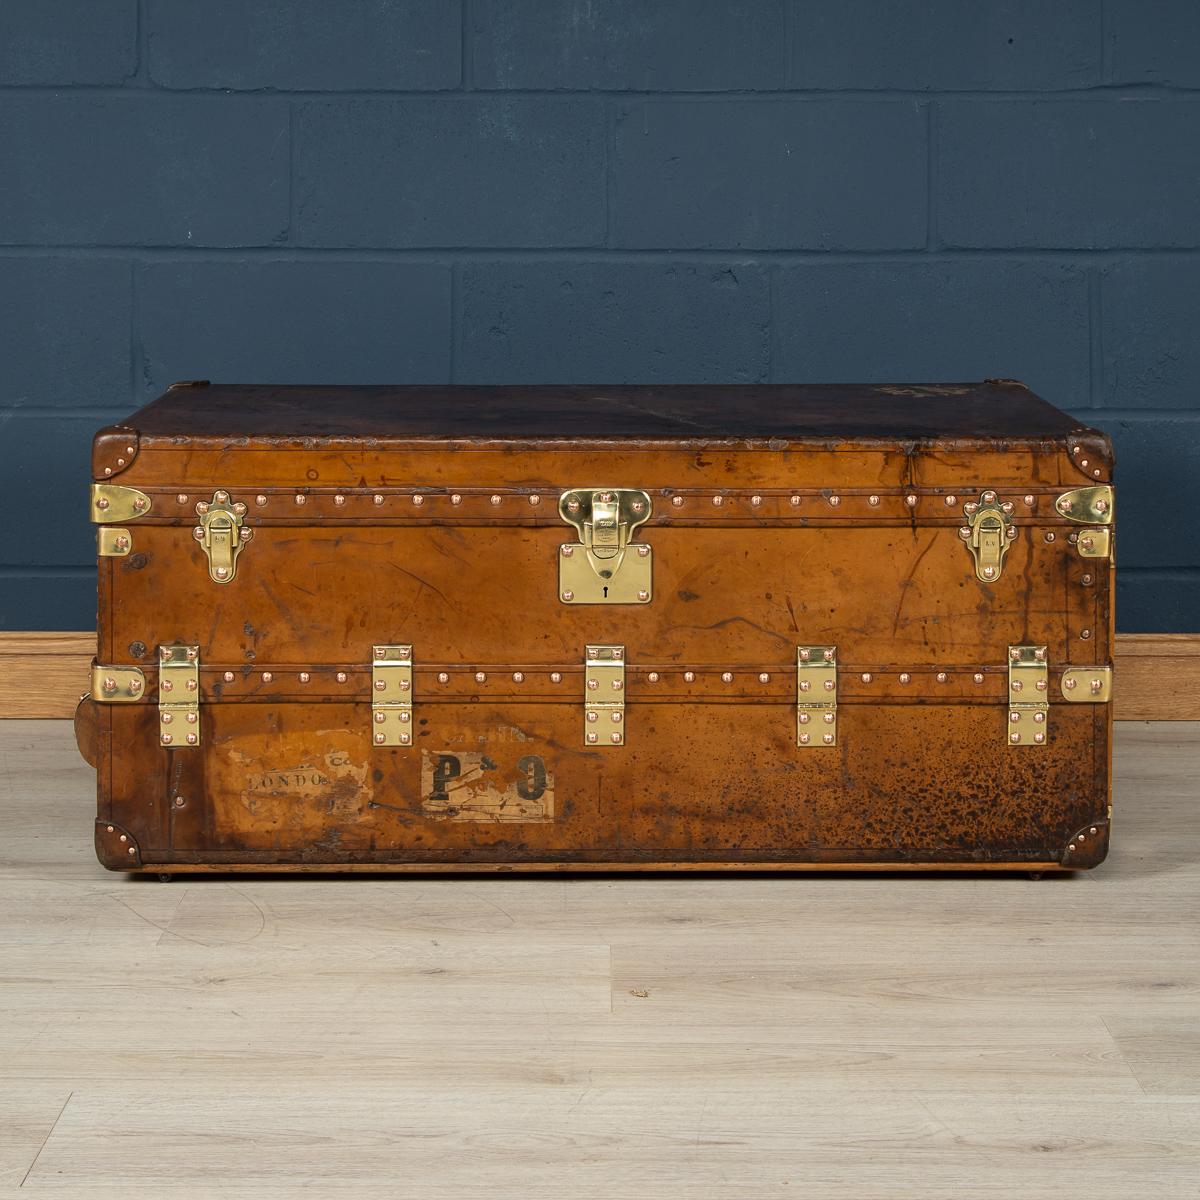 One of the most popular and sought after Louis Vuitton trunks is the gentleman’s wardrobe finished in cowhide leather, dating to the early part of the 20th century. These coverings were custom orders with Louis Vuitton, made from a single sheet of